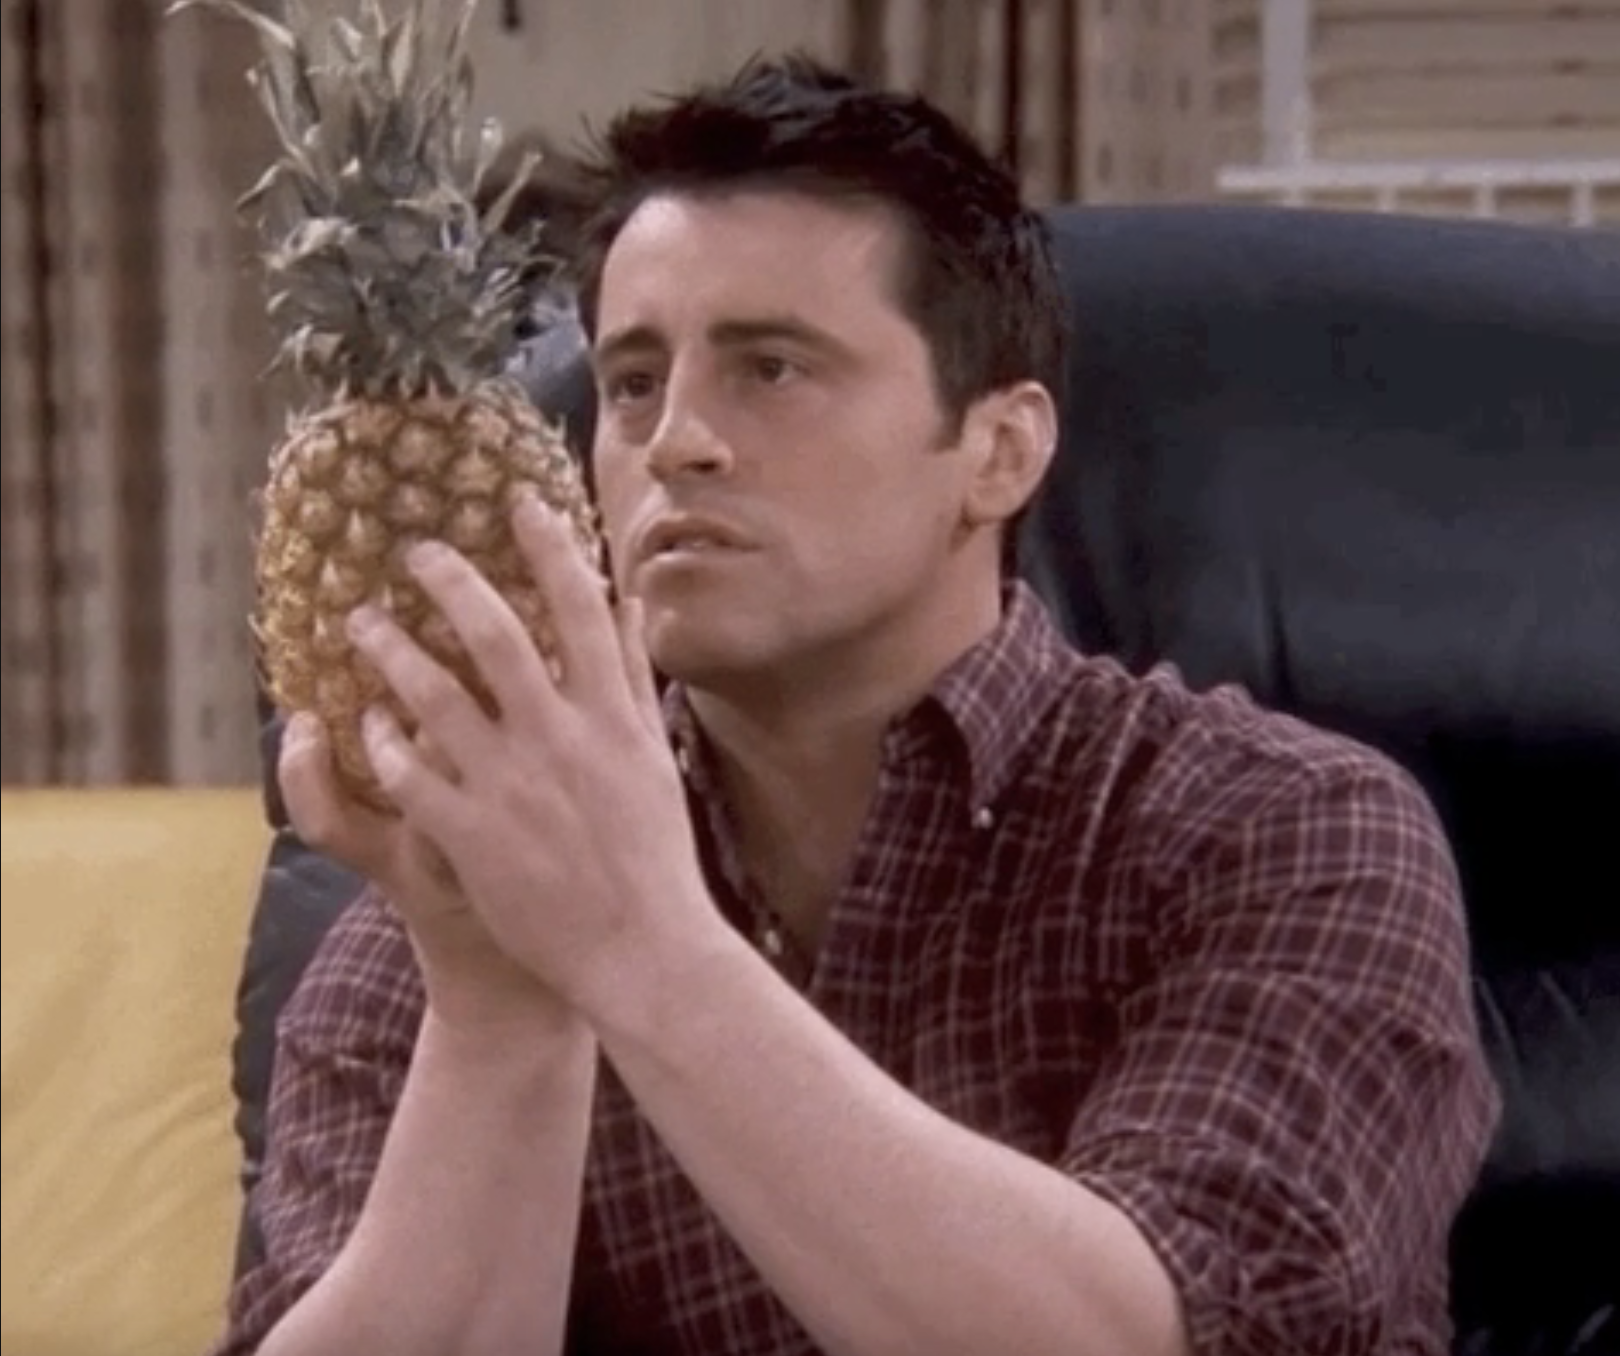 Joey from &quot;Friends&quot; gazes lovingly at a pineapple